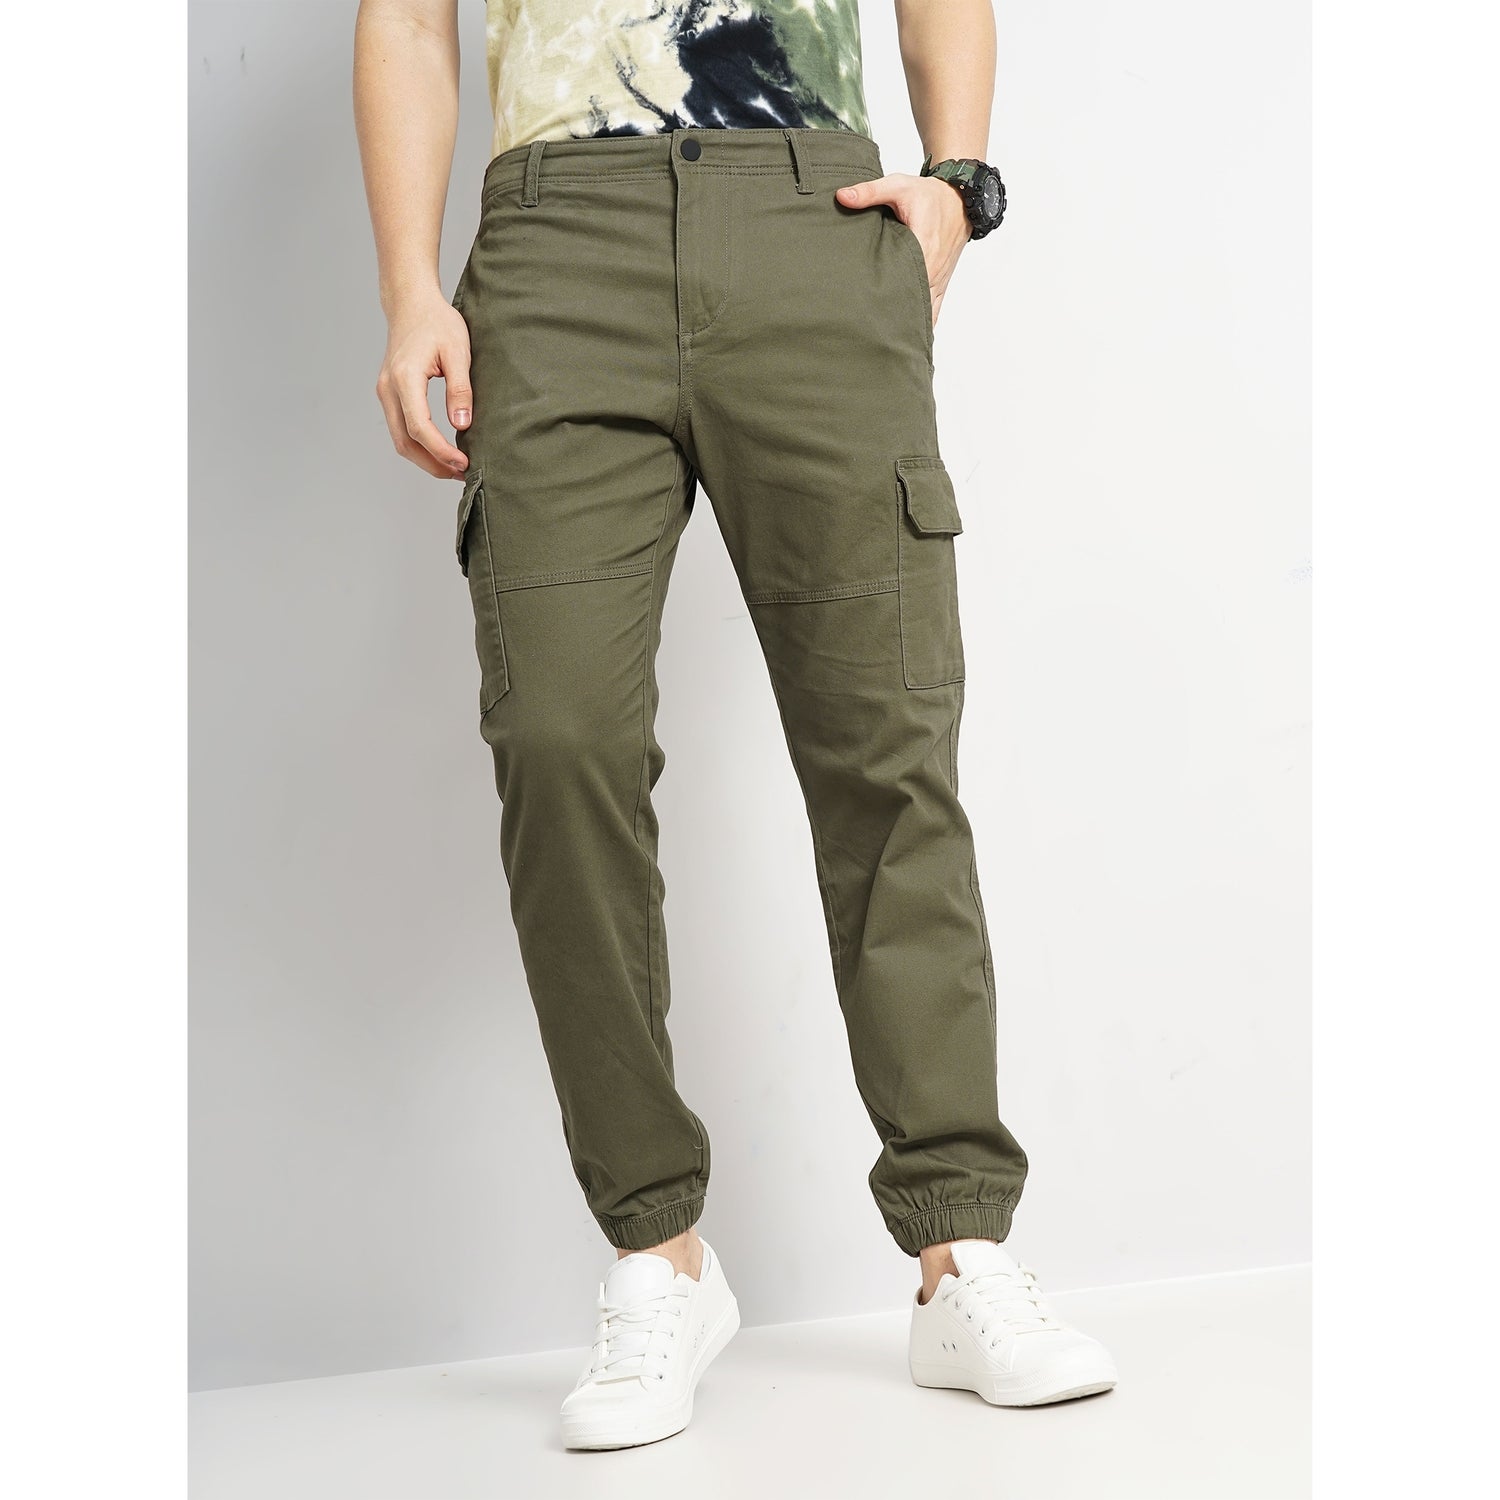 Men Green Solid Loose Fit Cotton Cargos (DOLYTE1)